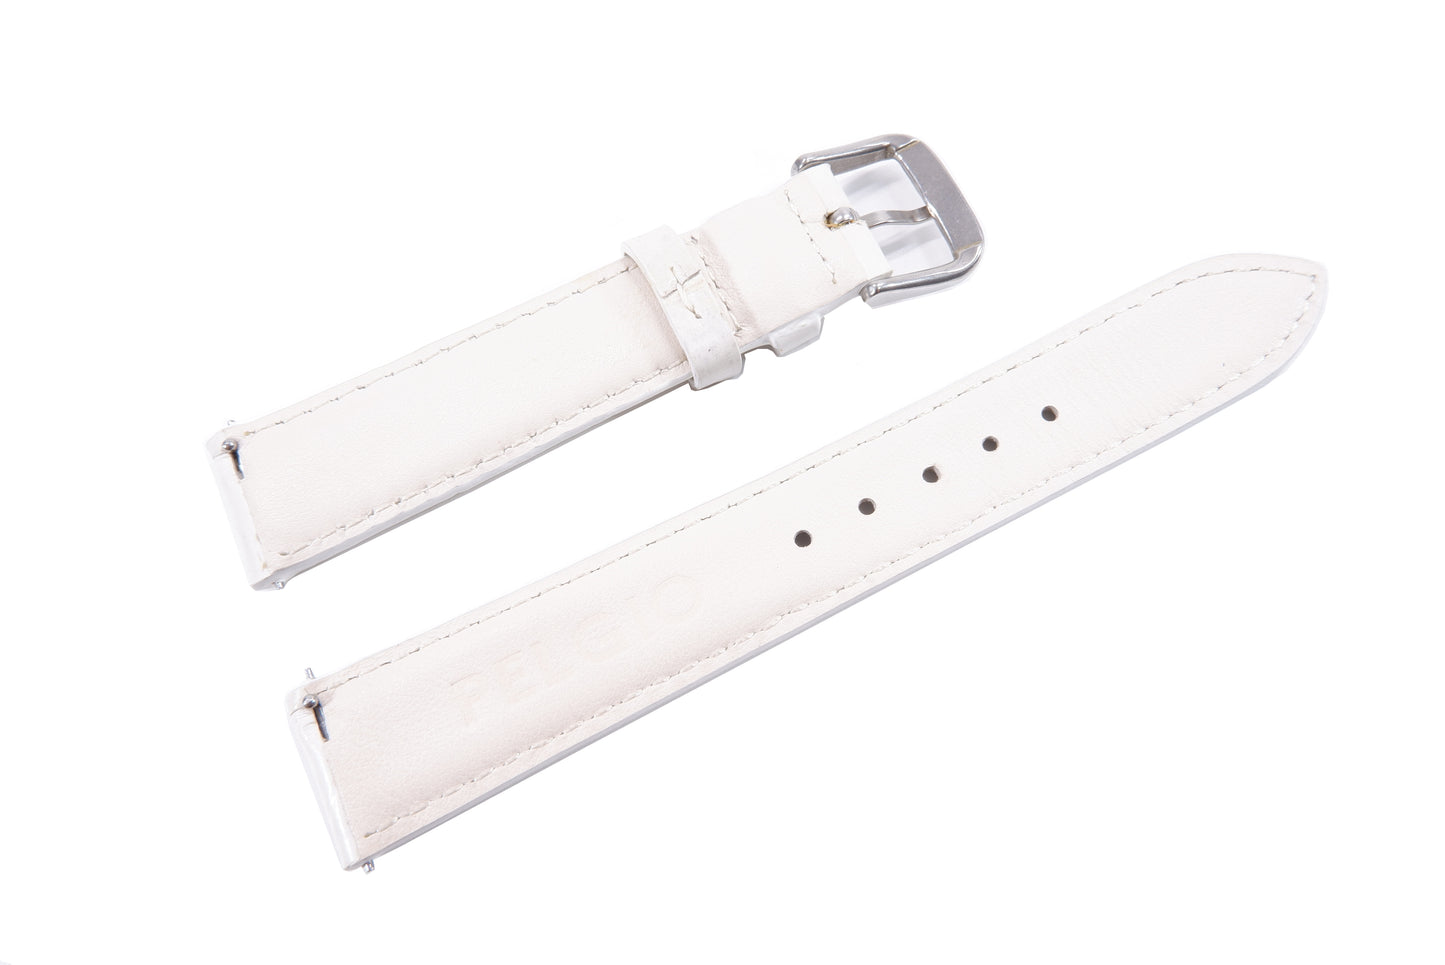 Genuine Crocodile Belly Skin Leather Quick Release Watch Strap Natural White Band with Buckle